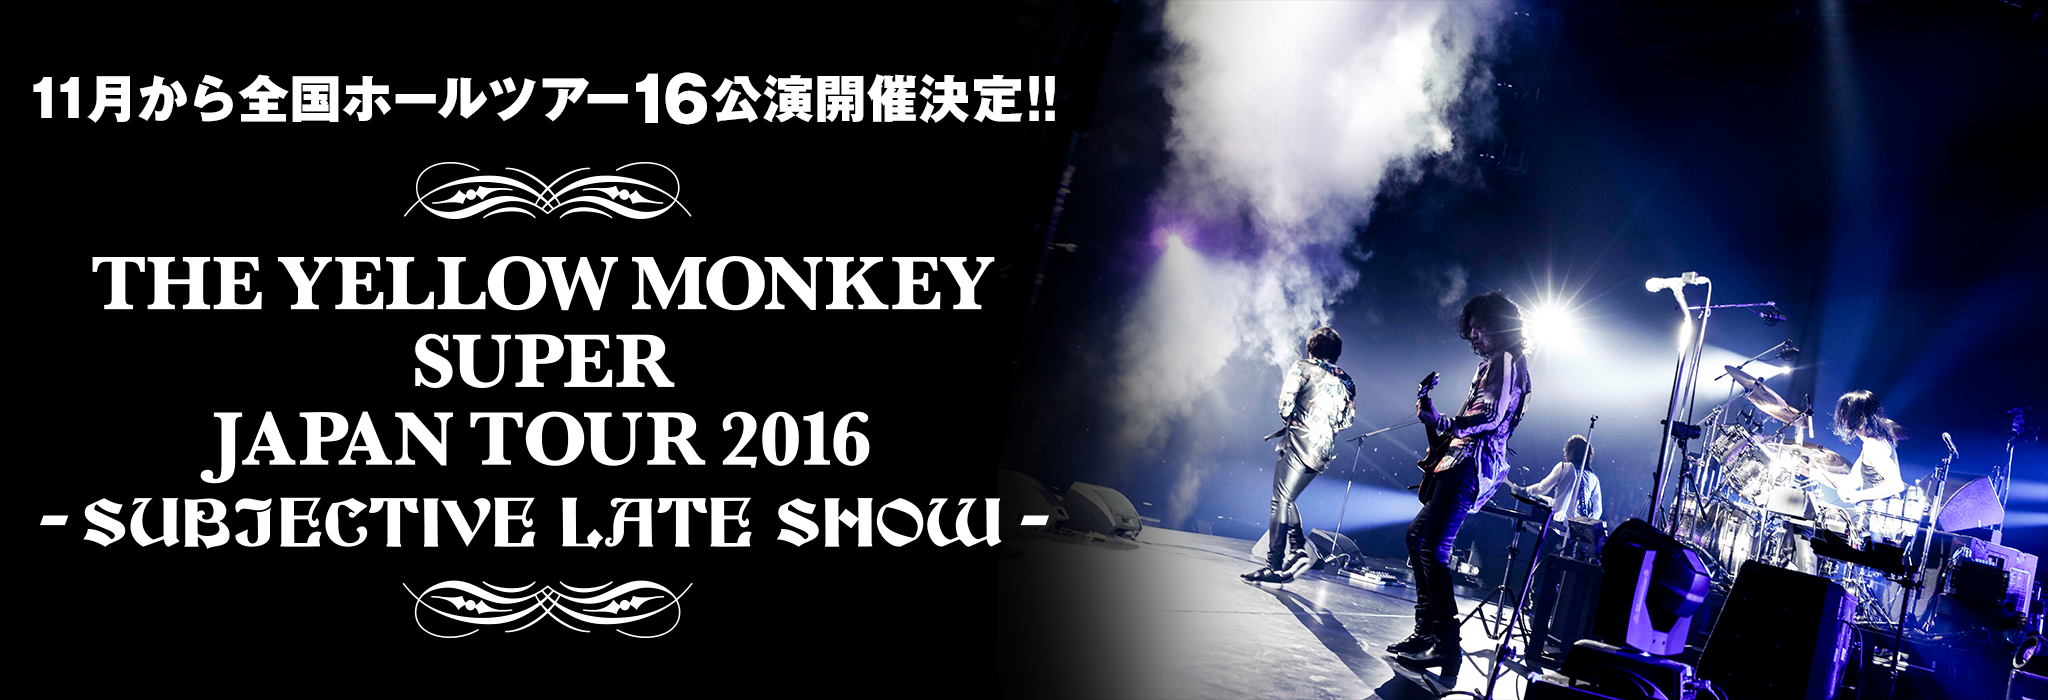 THE YELLOW MONKEY SUPER JAPAN TOUR 2016 -SUBJECTIVE LATE SHOW- 